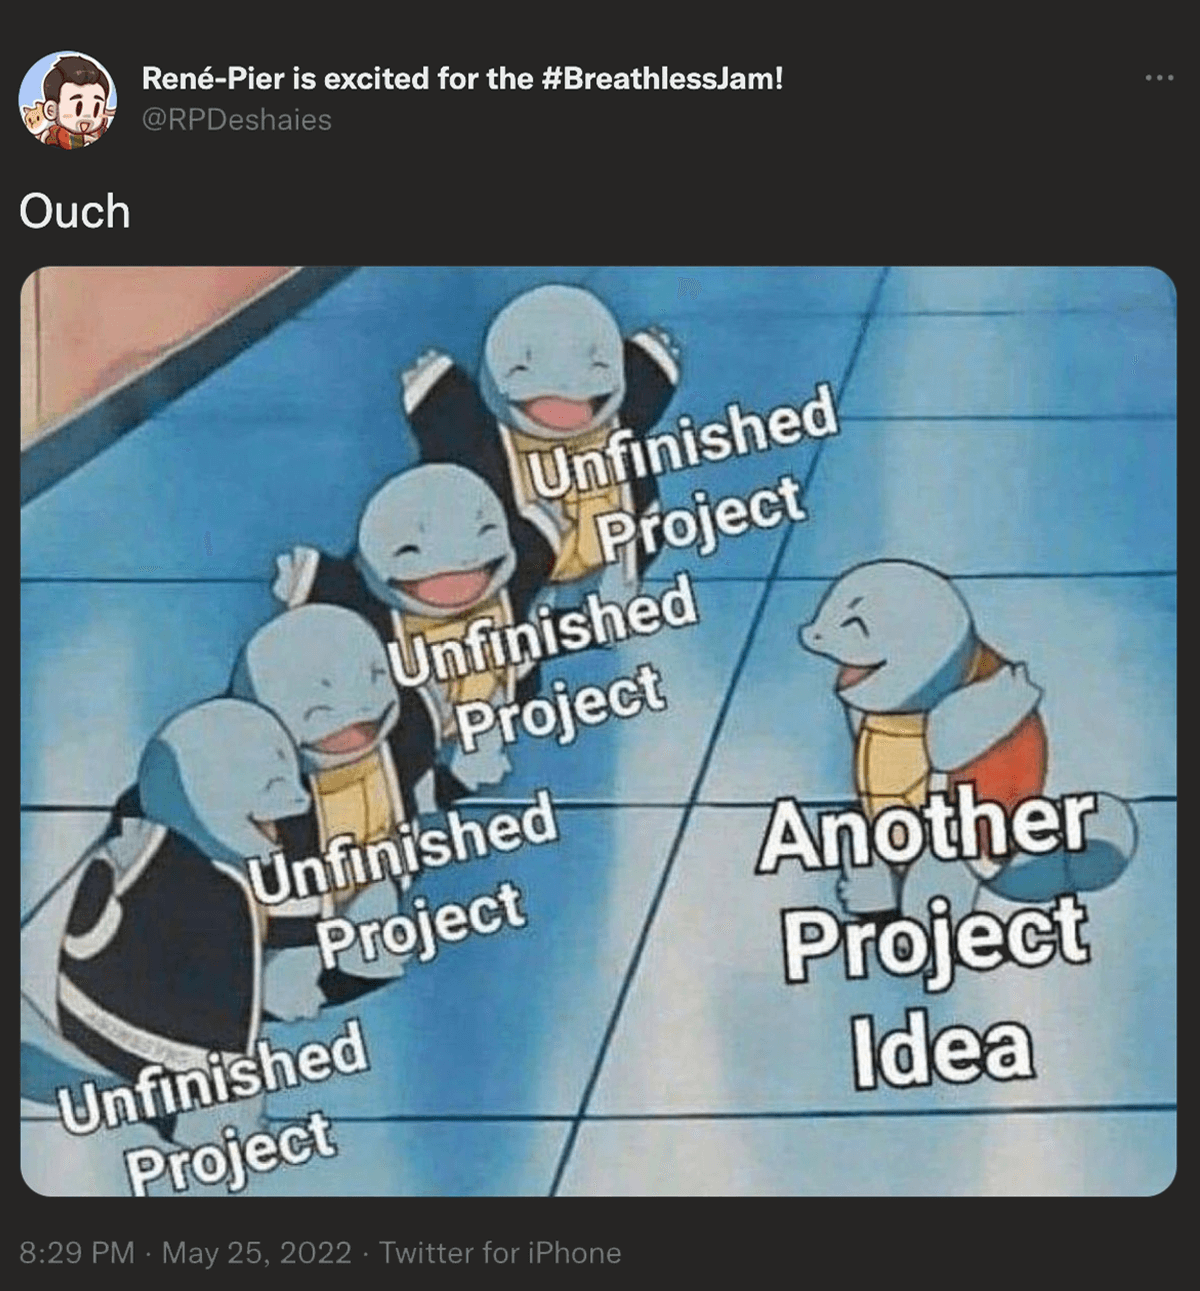 @RPDeshaies on twitter: Ouch. A bunch of unfinished projects being joined by another project idea.